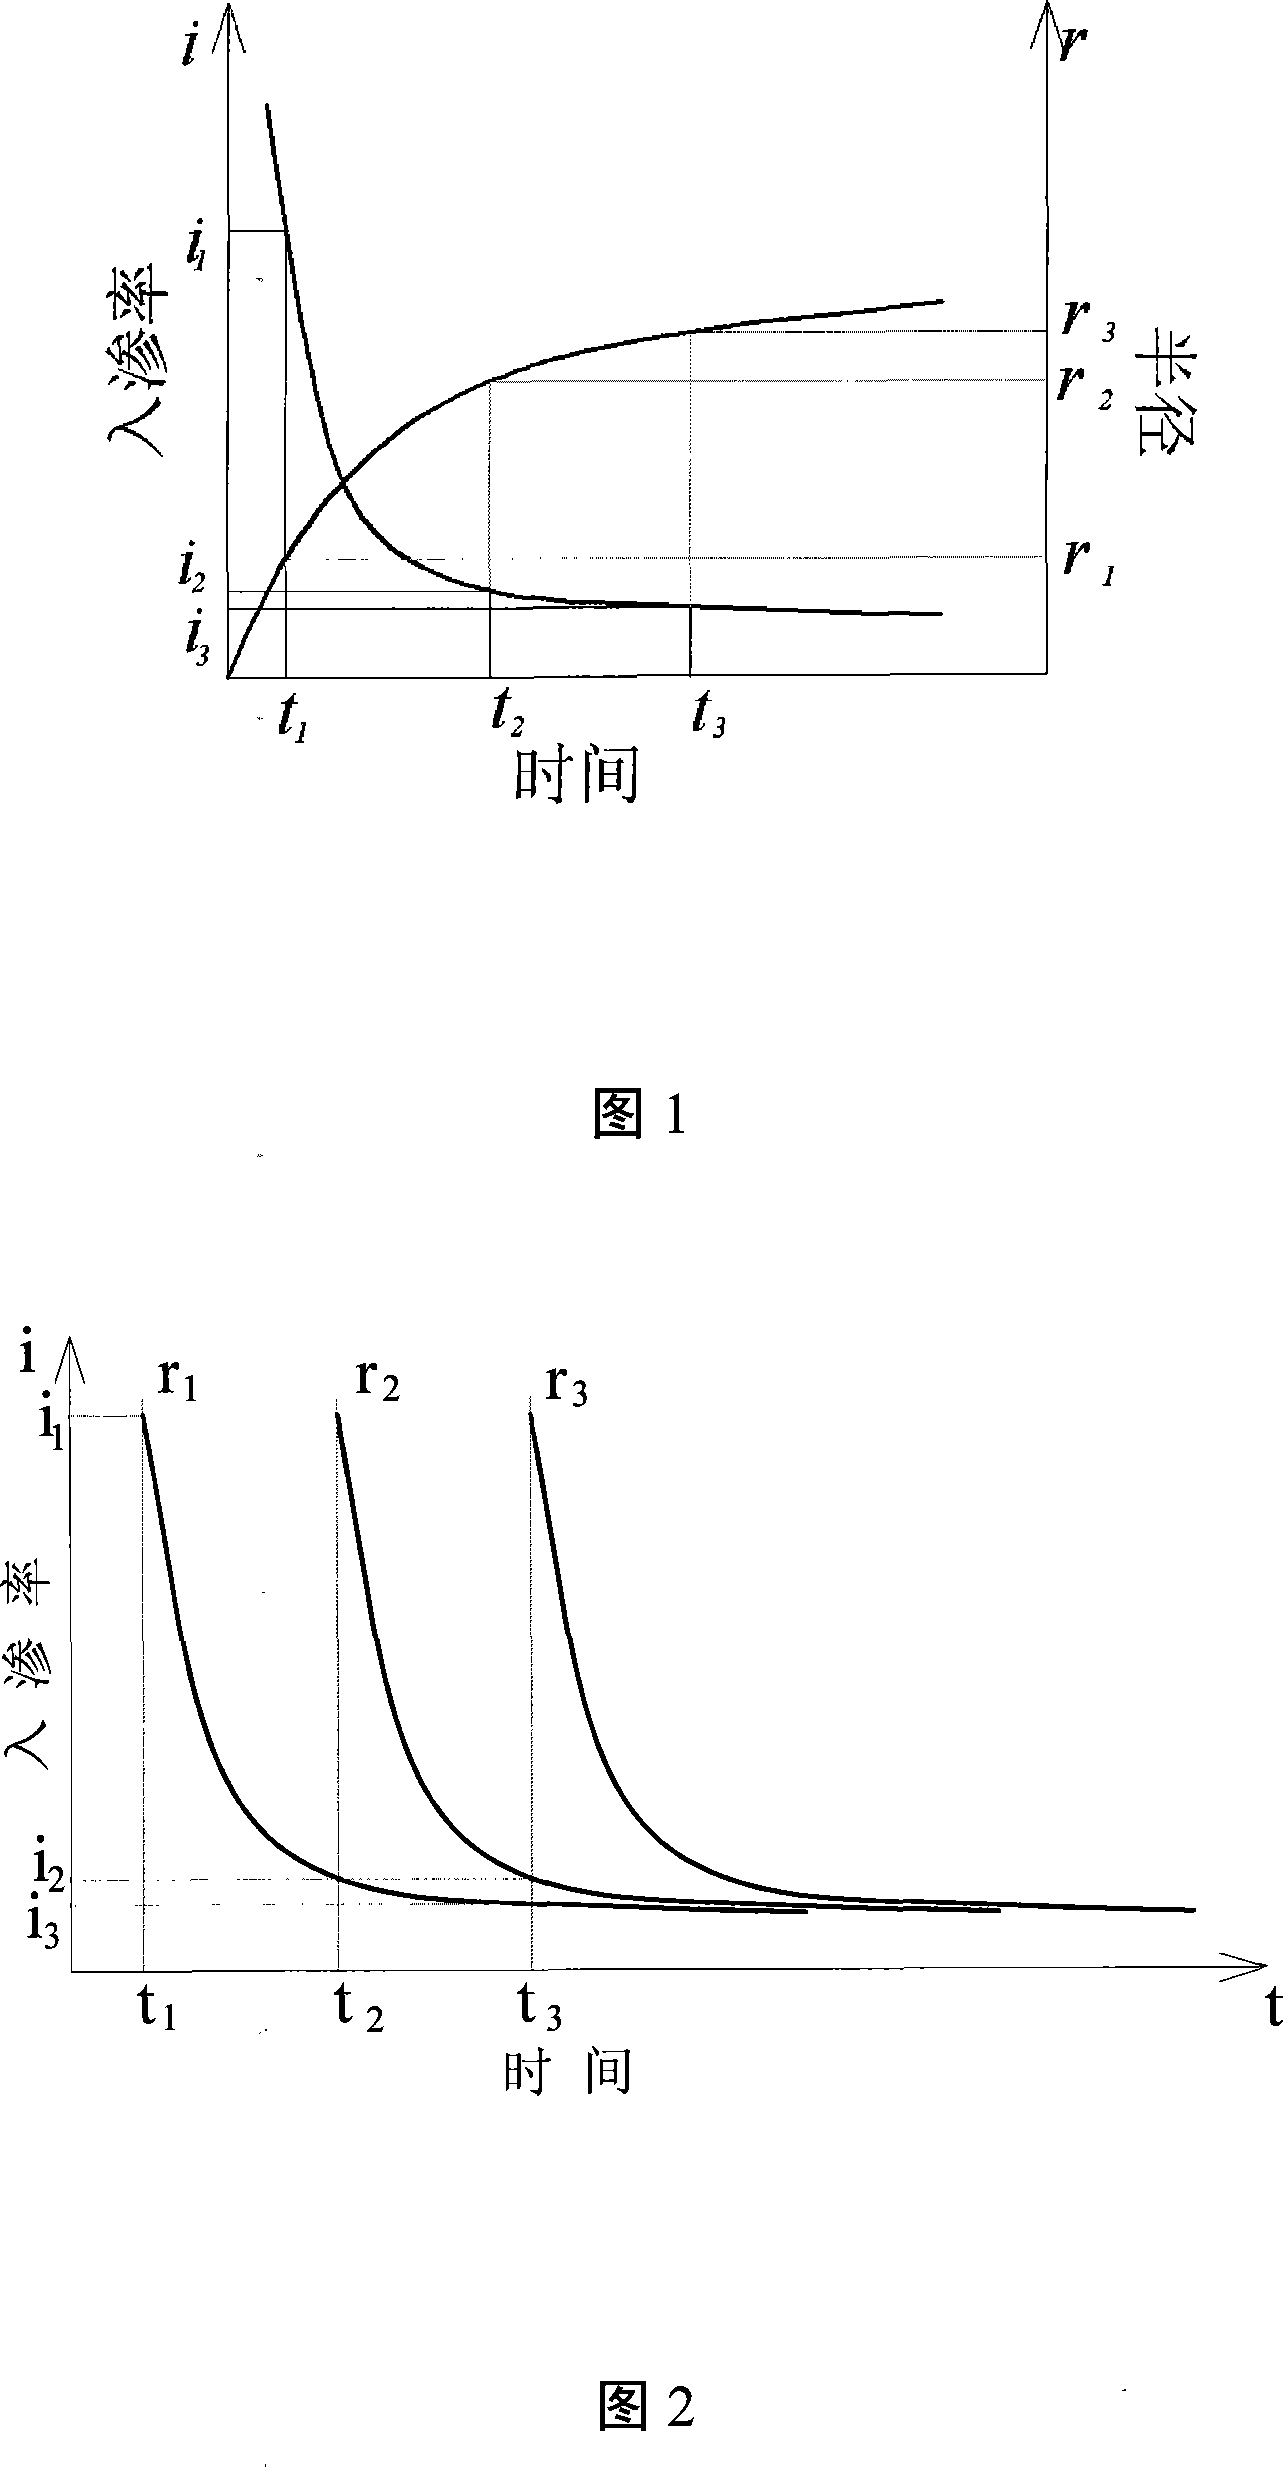 System and method for measuring soil infiltration capability